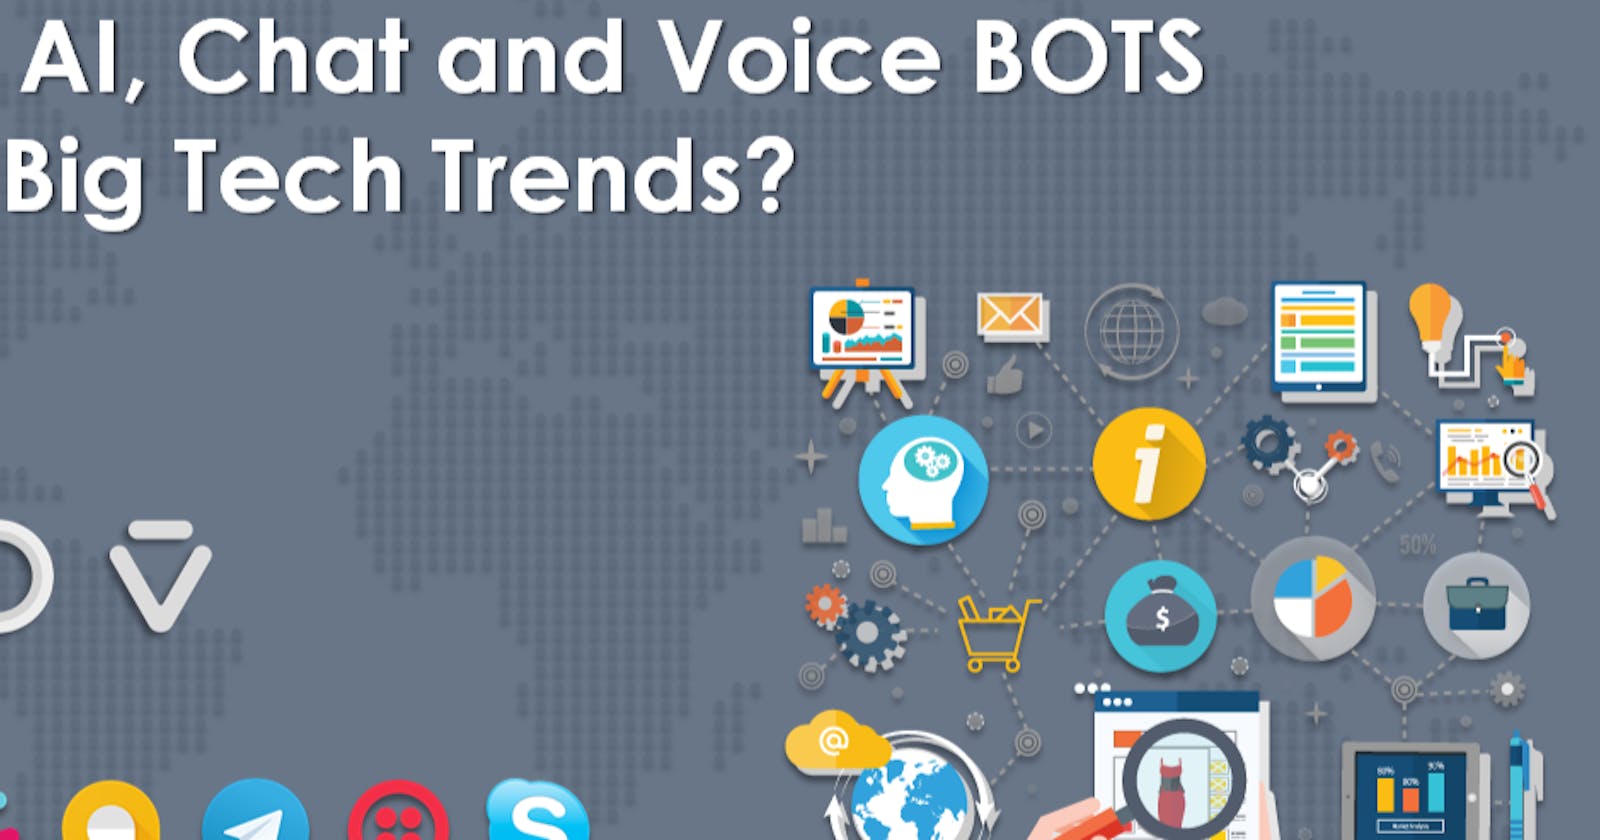 Why are AI, Chatbots & Voicebots big tech trends?